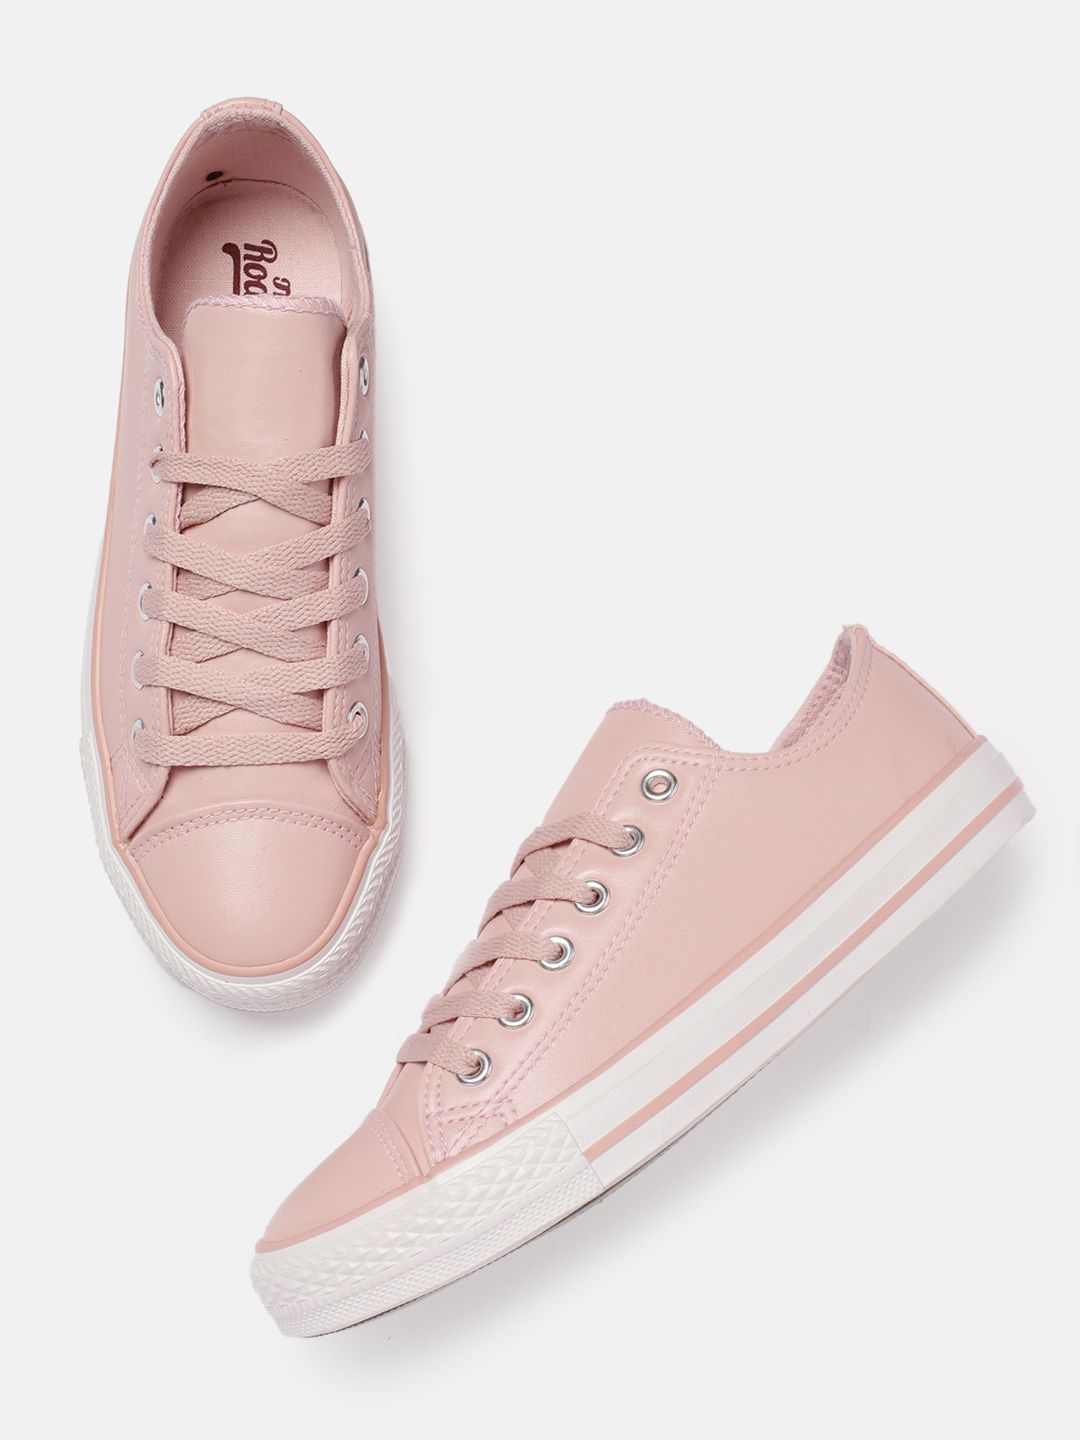 The Roadster Lifestyle Co Women Pink Sneakers Price in India